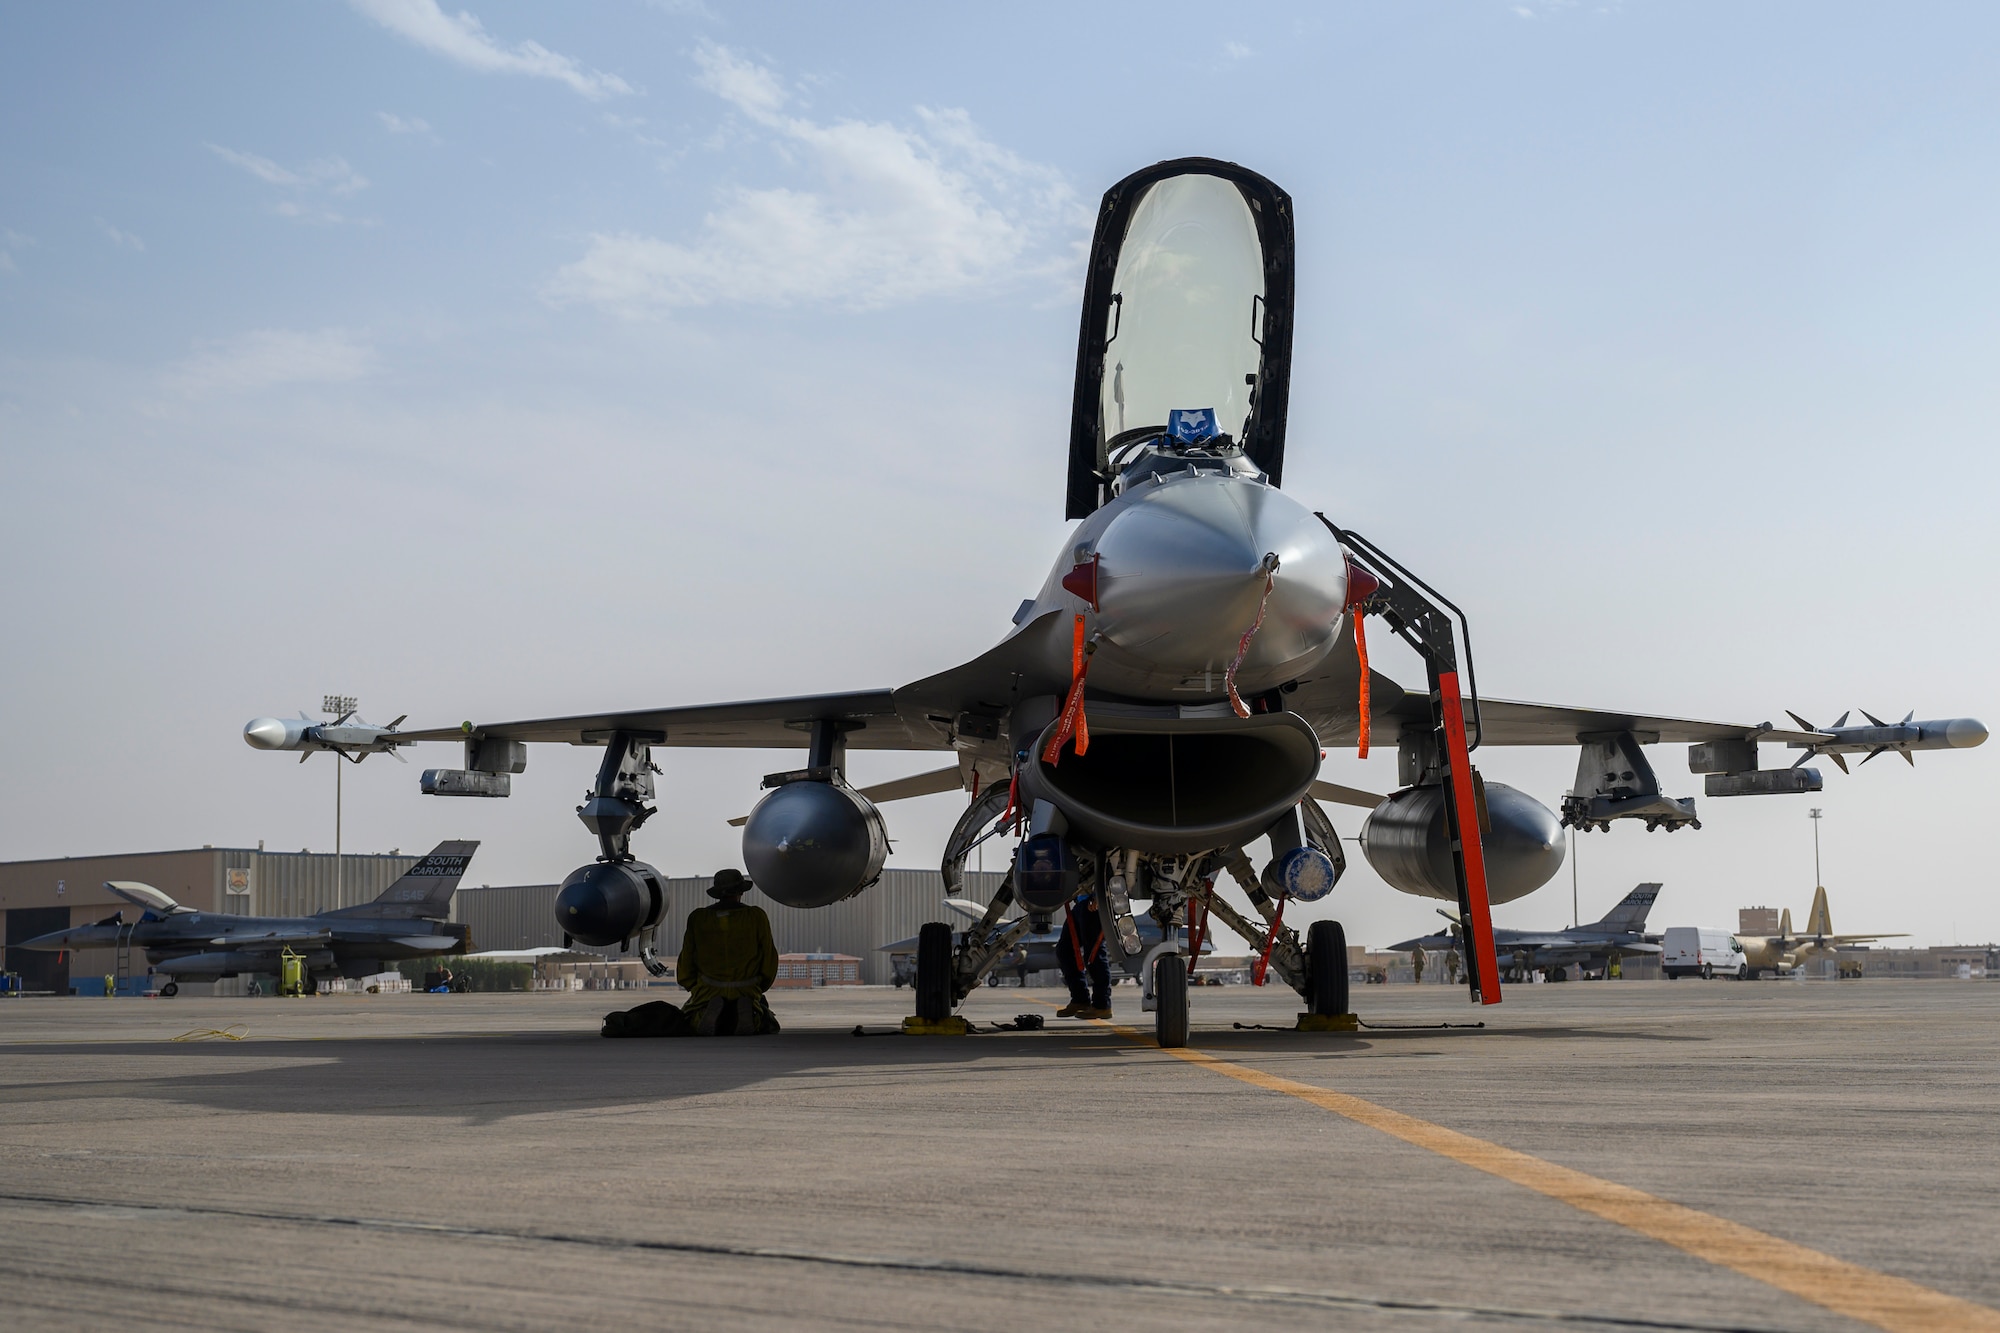 A U.S. Air Force F-16CJ Fighting Falcon from South Carolina Air National Guard’s 169th “Swamp Fox” Fighter Wing sits on the flightline at Prince Sultan Air Base, Kingdom of Saudi Arabia, April 14, 2021. The Swamp Fox team has been deployed to PSAB to help bolster the defensive capabilities against potential threats in the region. (U.S. Air Force Photo by Senior Airman Samuel Earick)